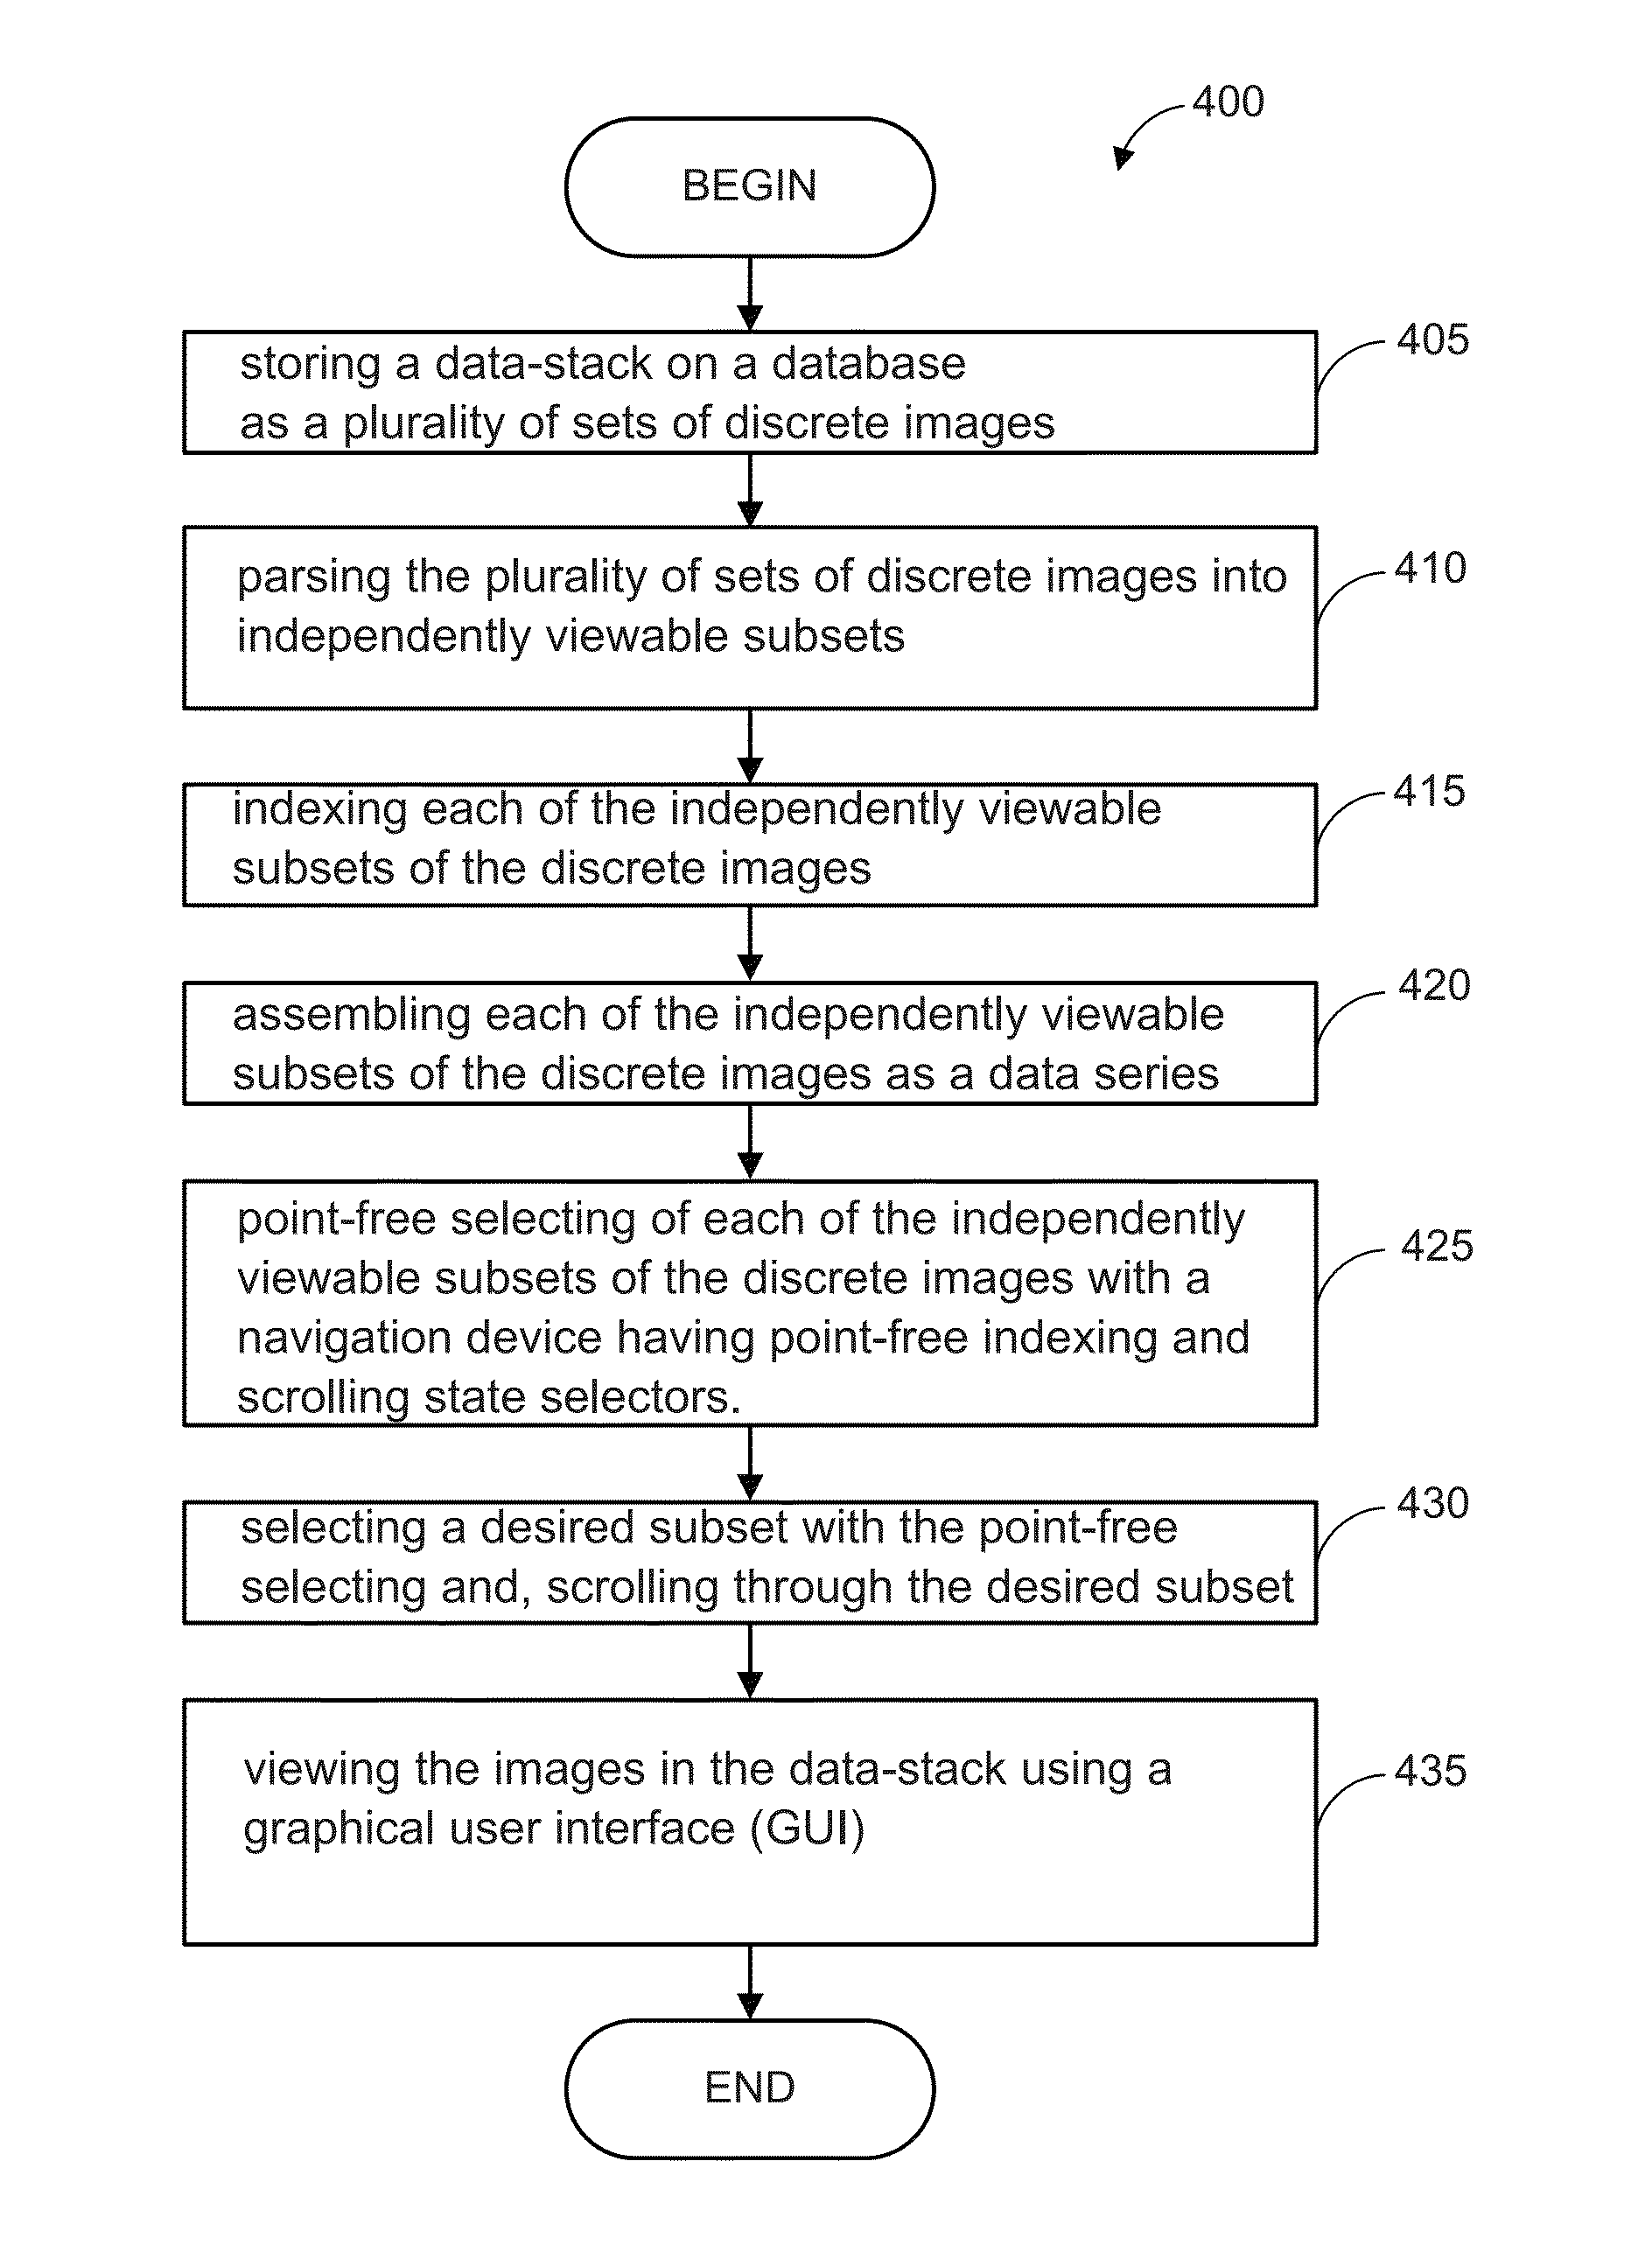 Control system for governing and/or monitoring how an image data-stack is viewed